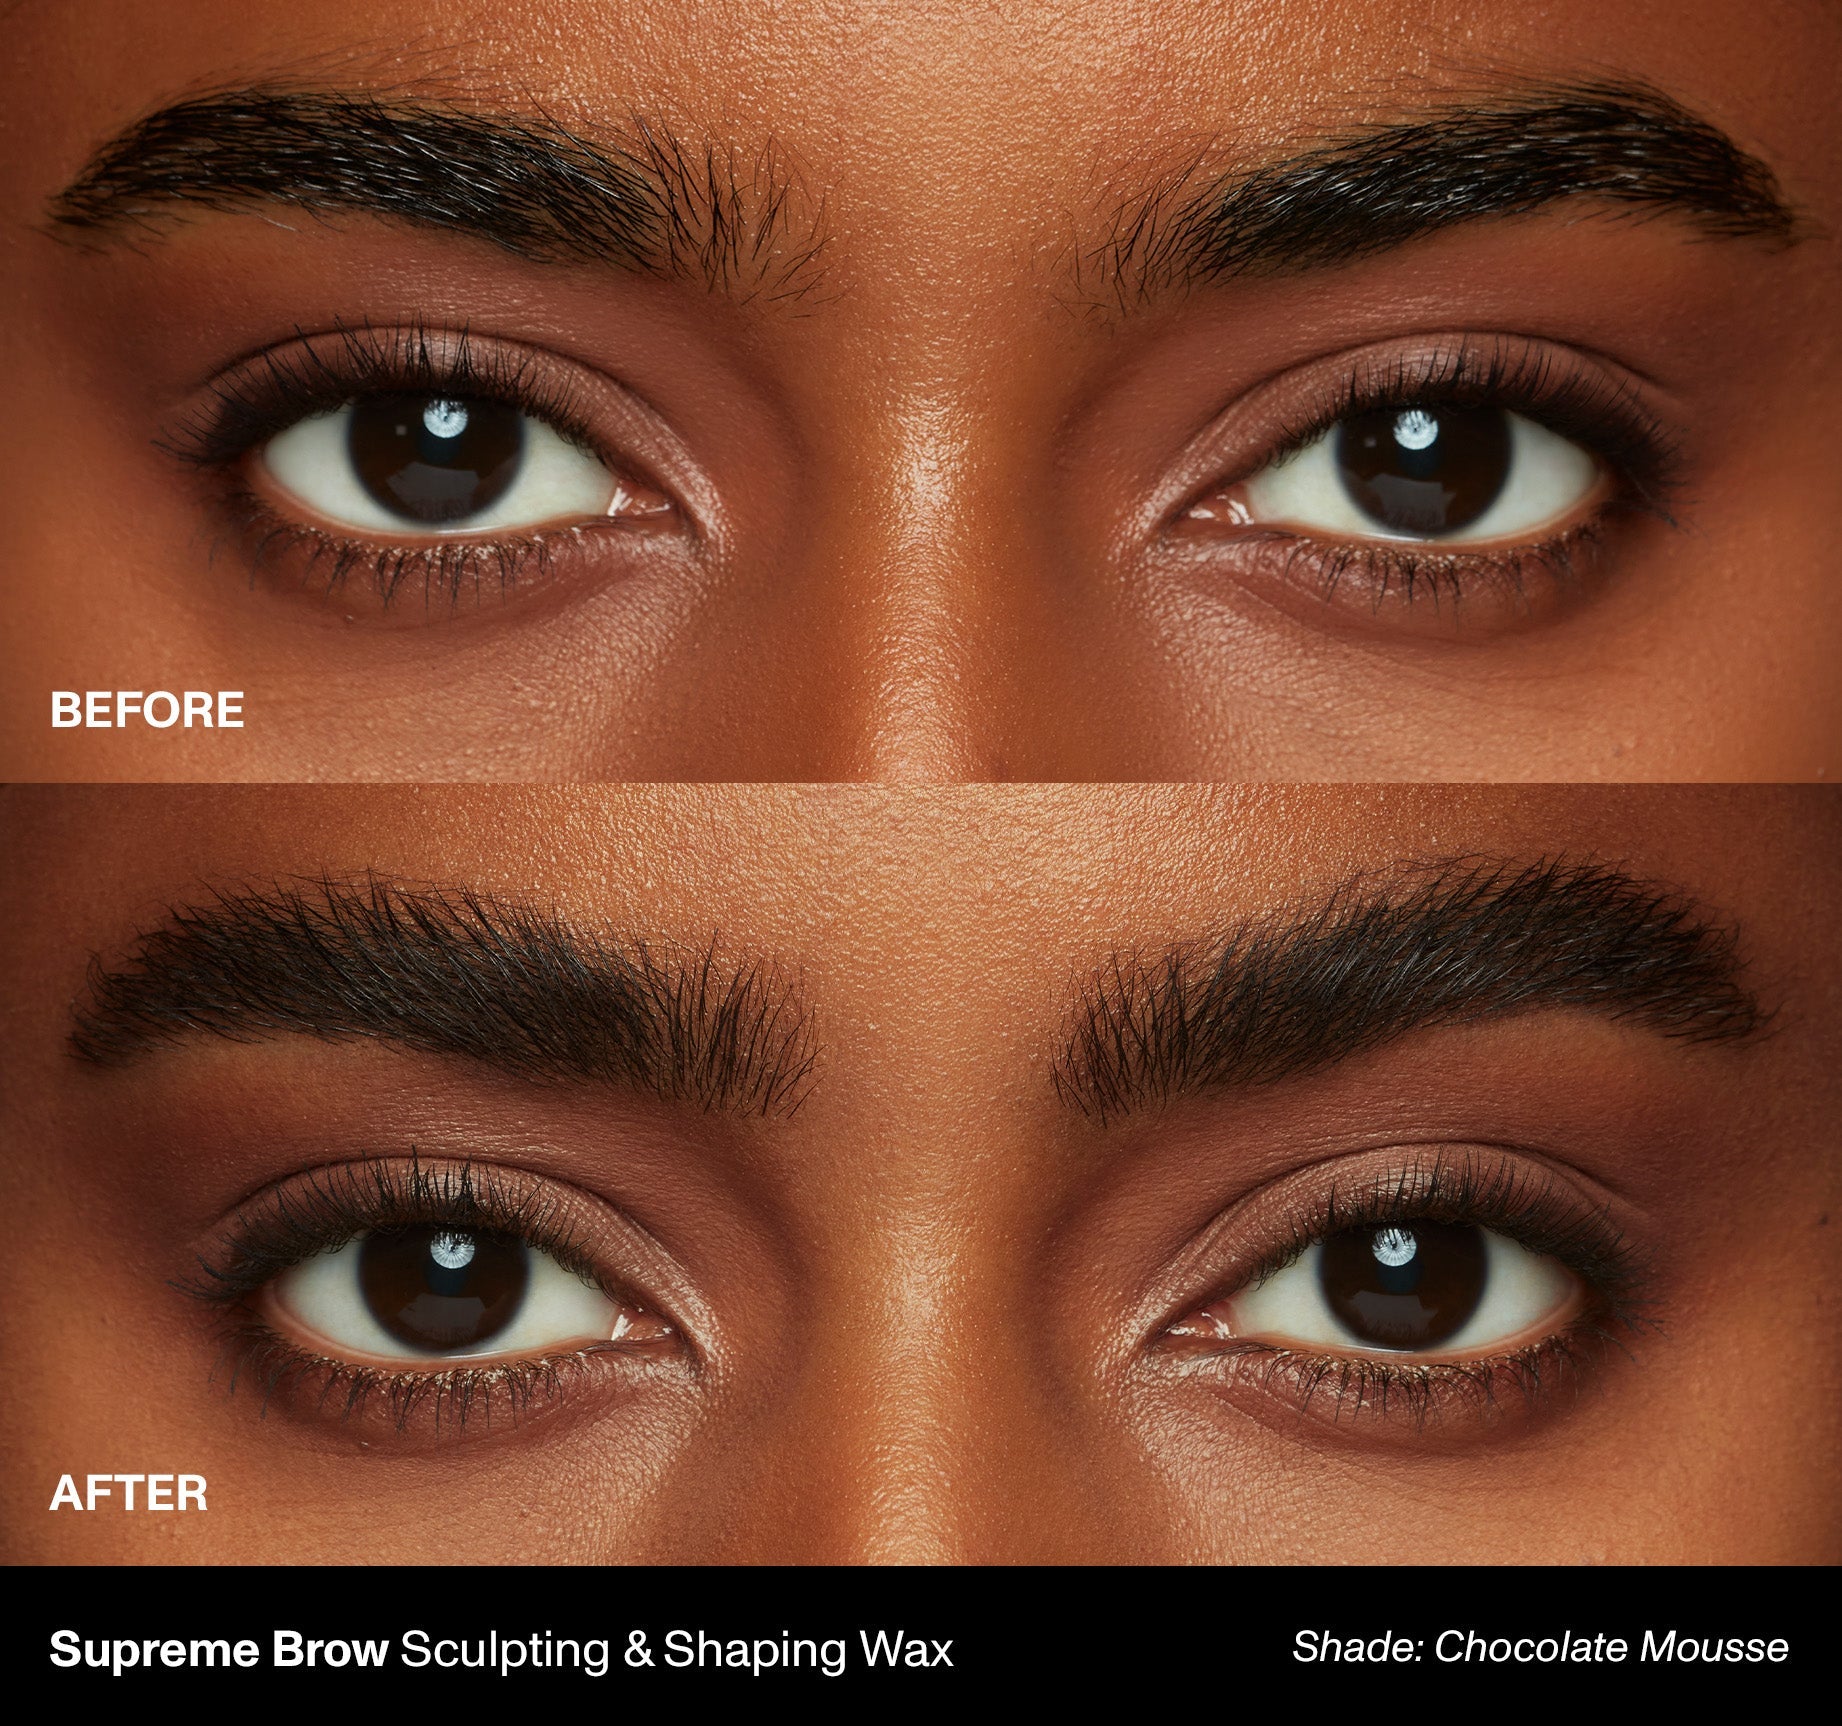 Supreme Brow Sculpting And Shaping Wax - Chocolate Mousse - Image 5